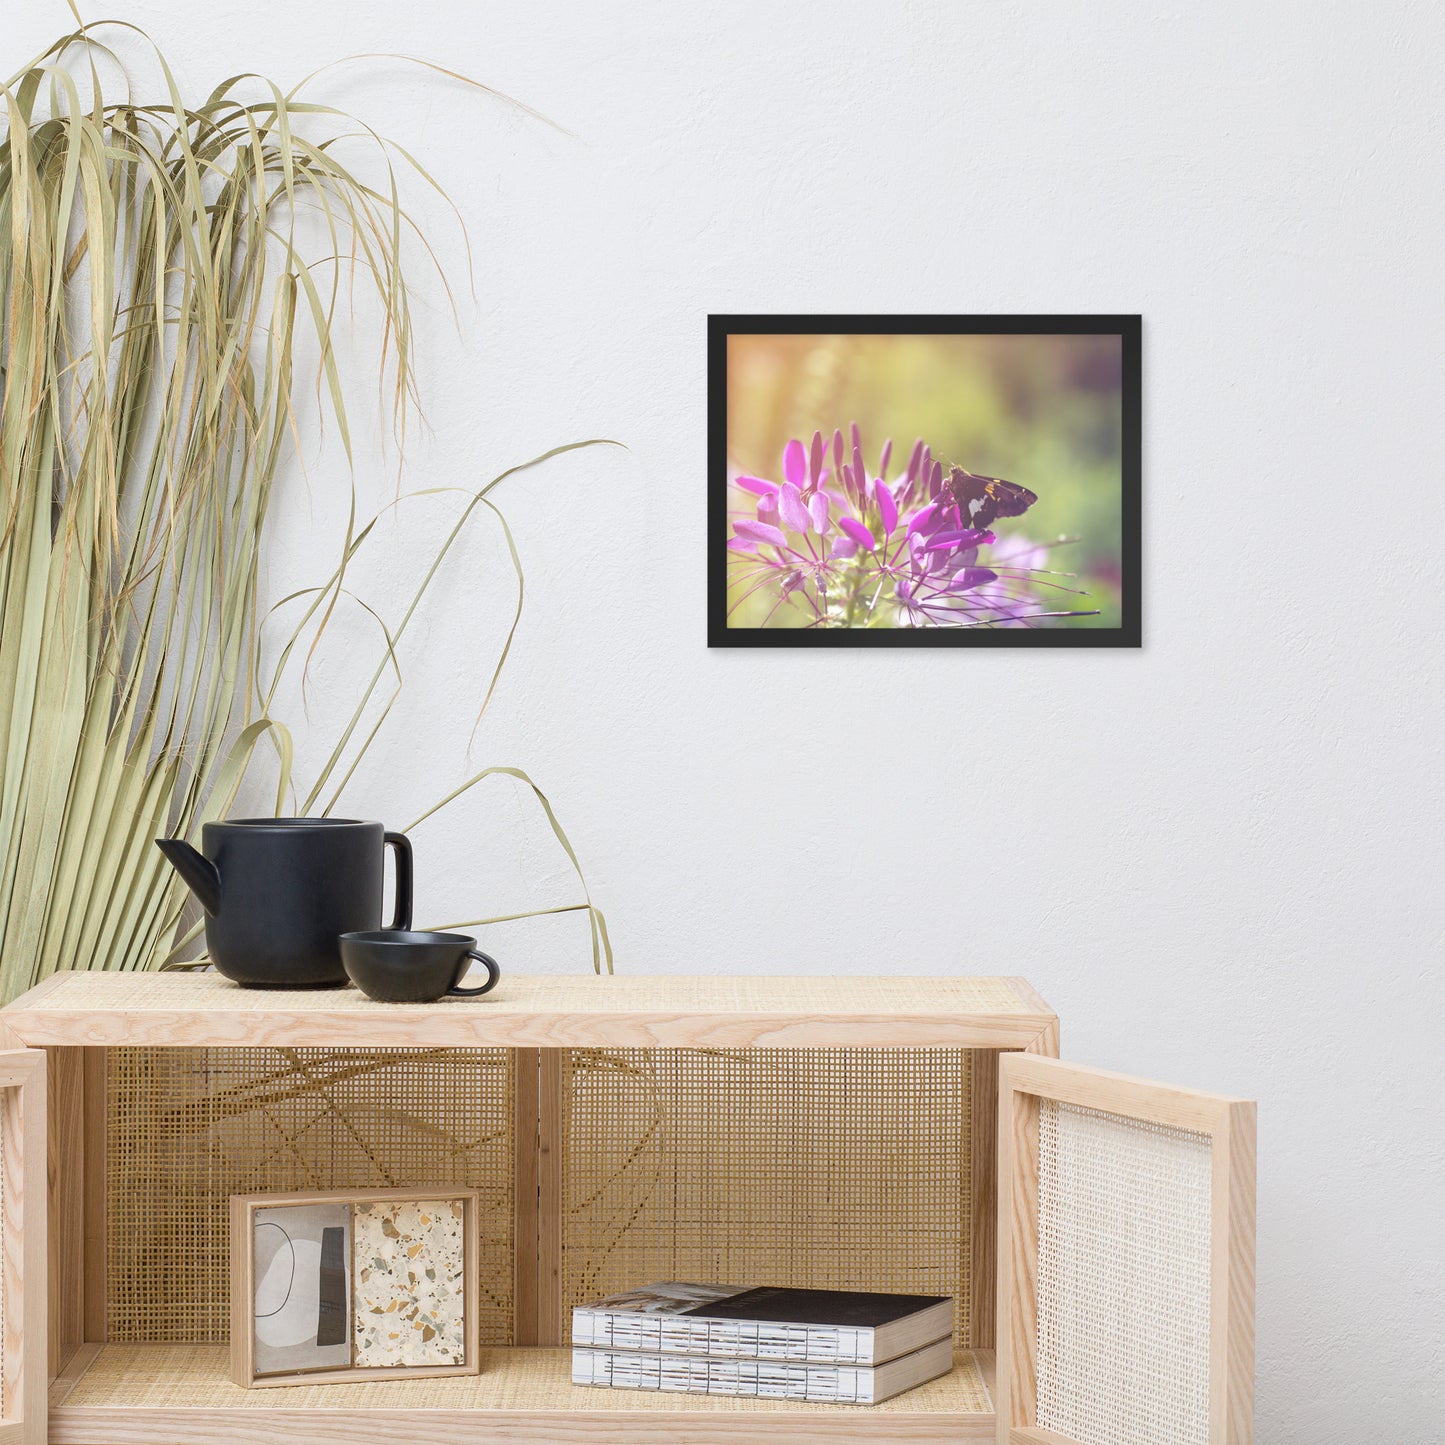 Spider Flower in Glory Light With Spotted Moth Floral Nature Photo Framed Wall Art Print